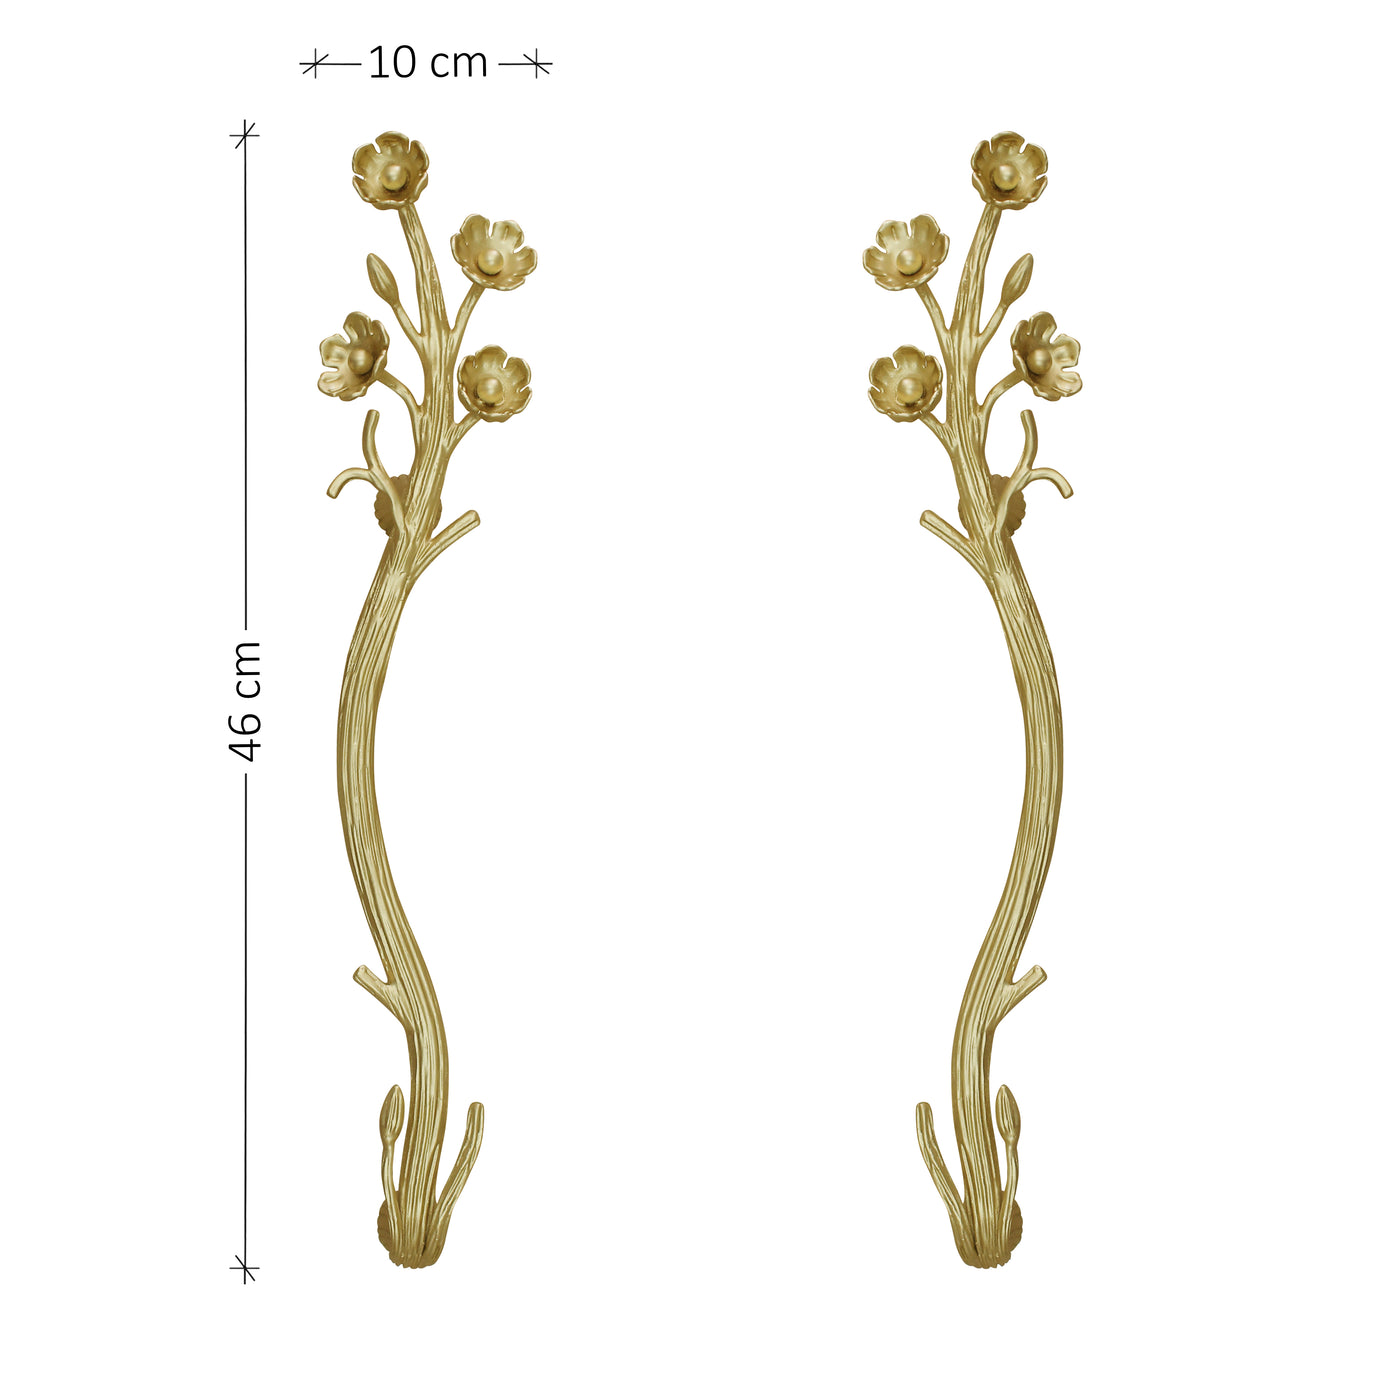 Flowers and branches themed steel door pull handles in gold color; with annotated dimensions